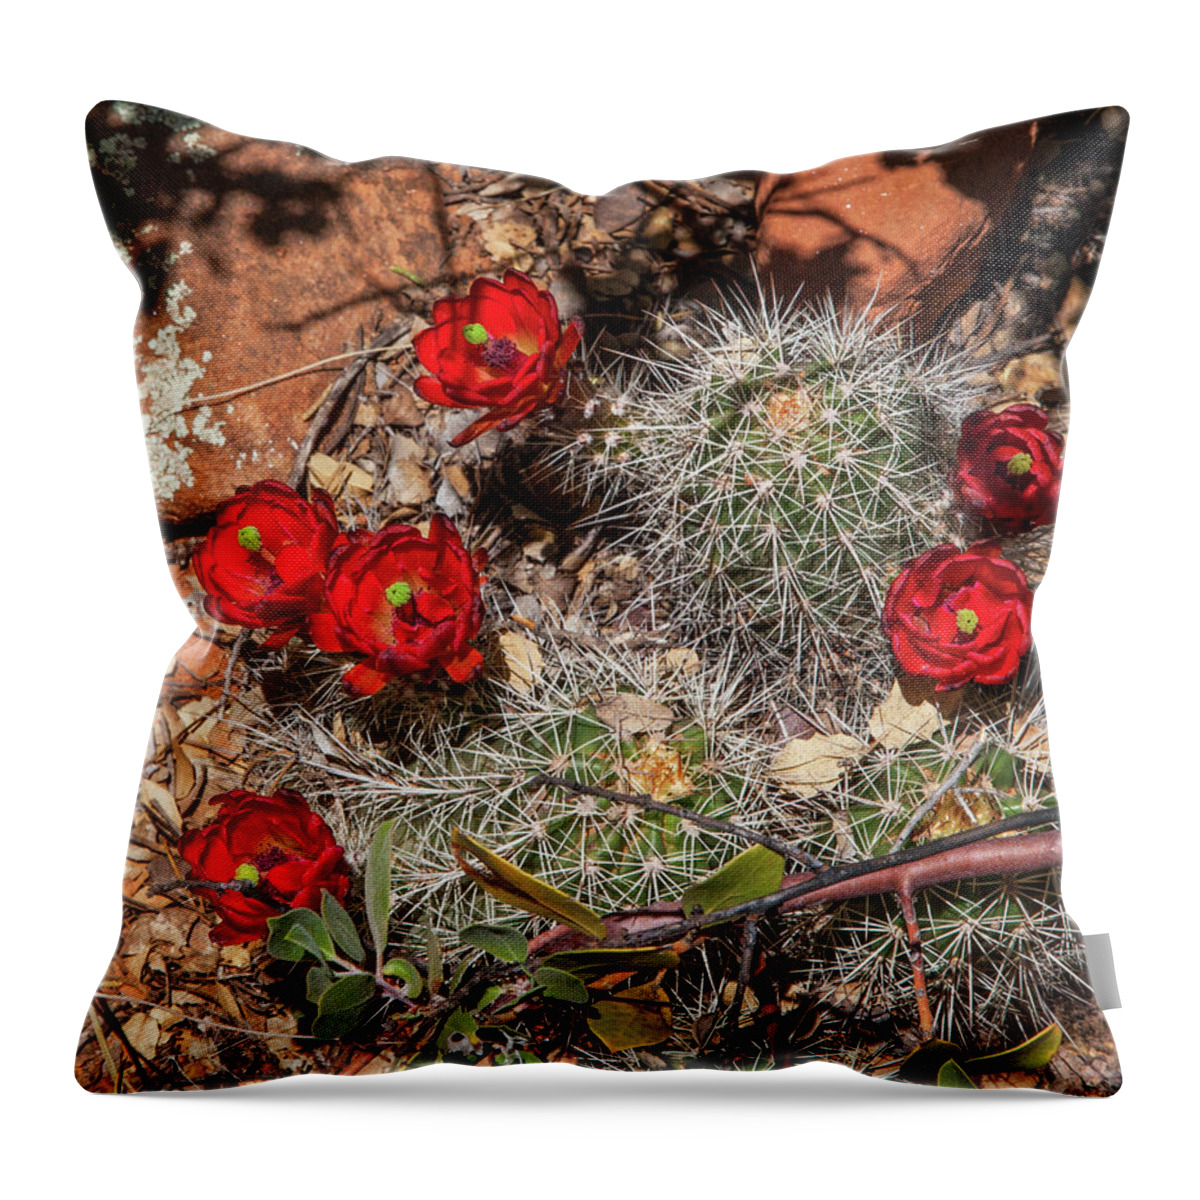 Scarlet Flowers Throw Pillow featuring the photograph Scarlet Cactus Blooms by Lon Dittrick